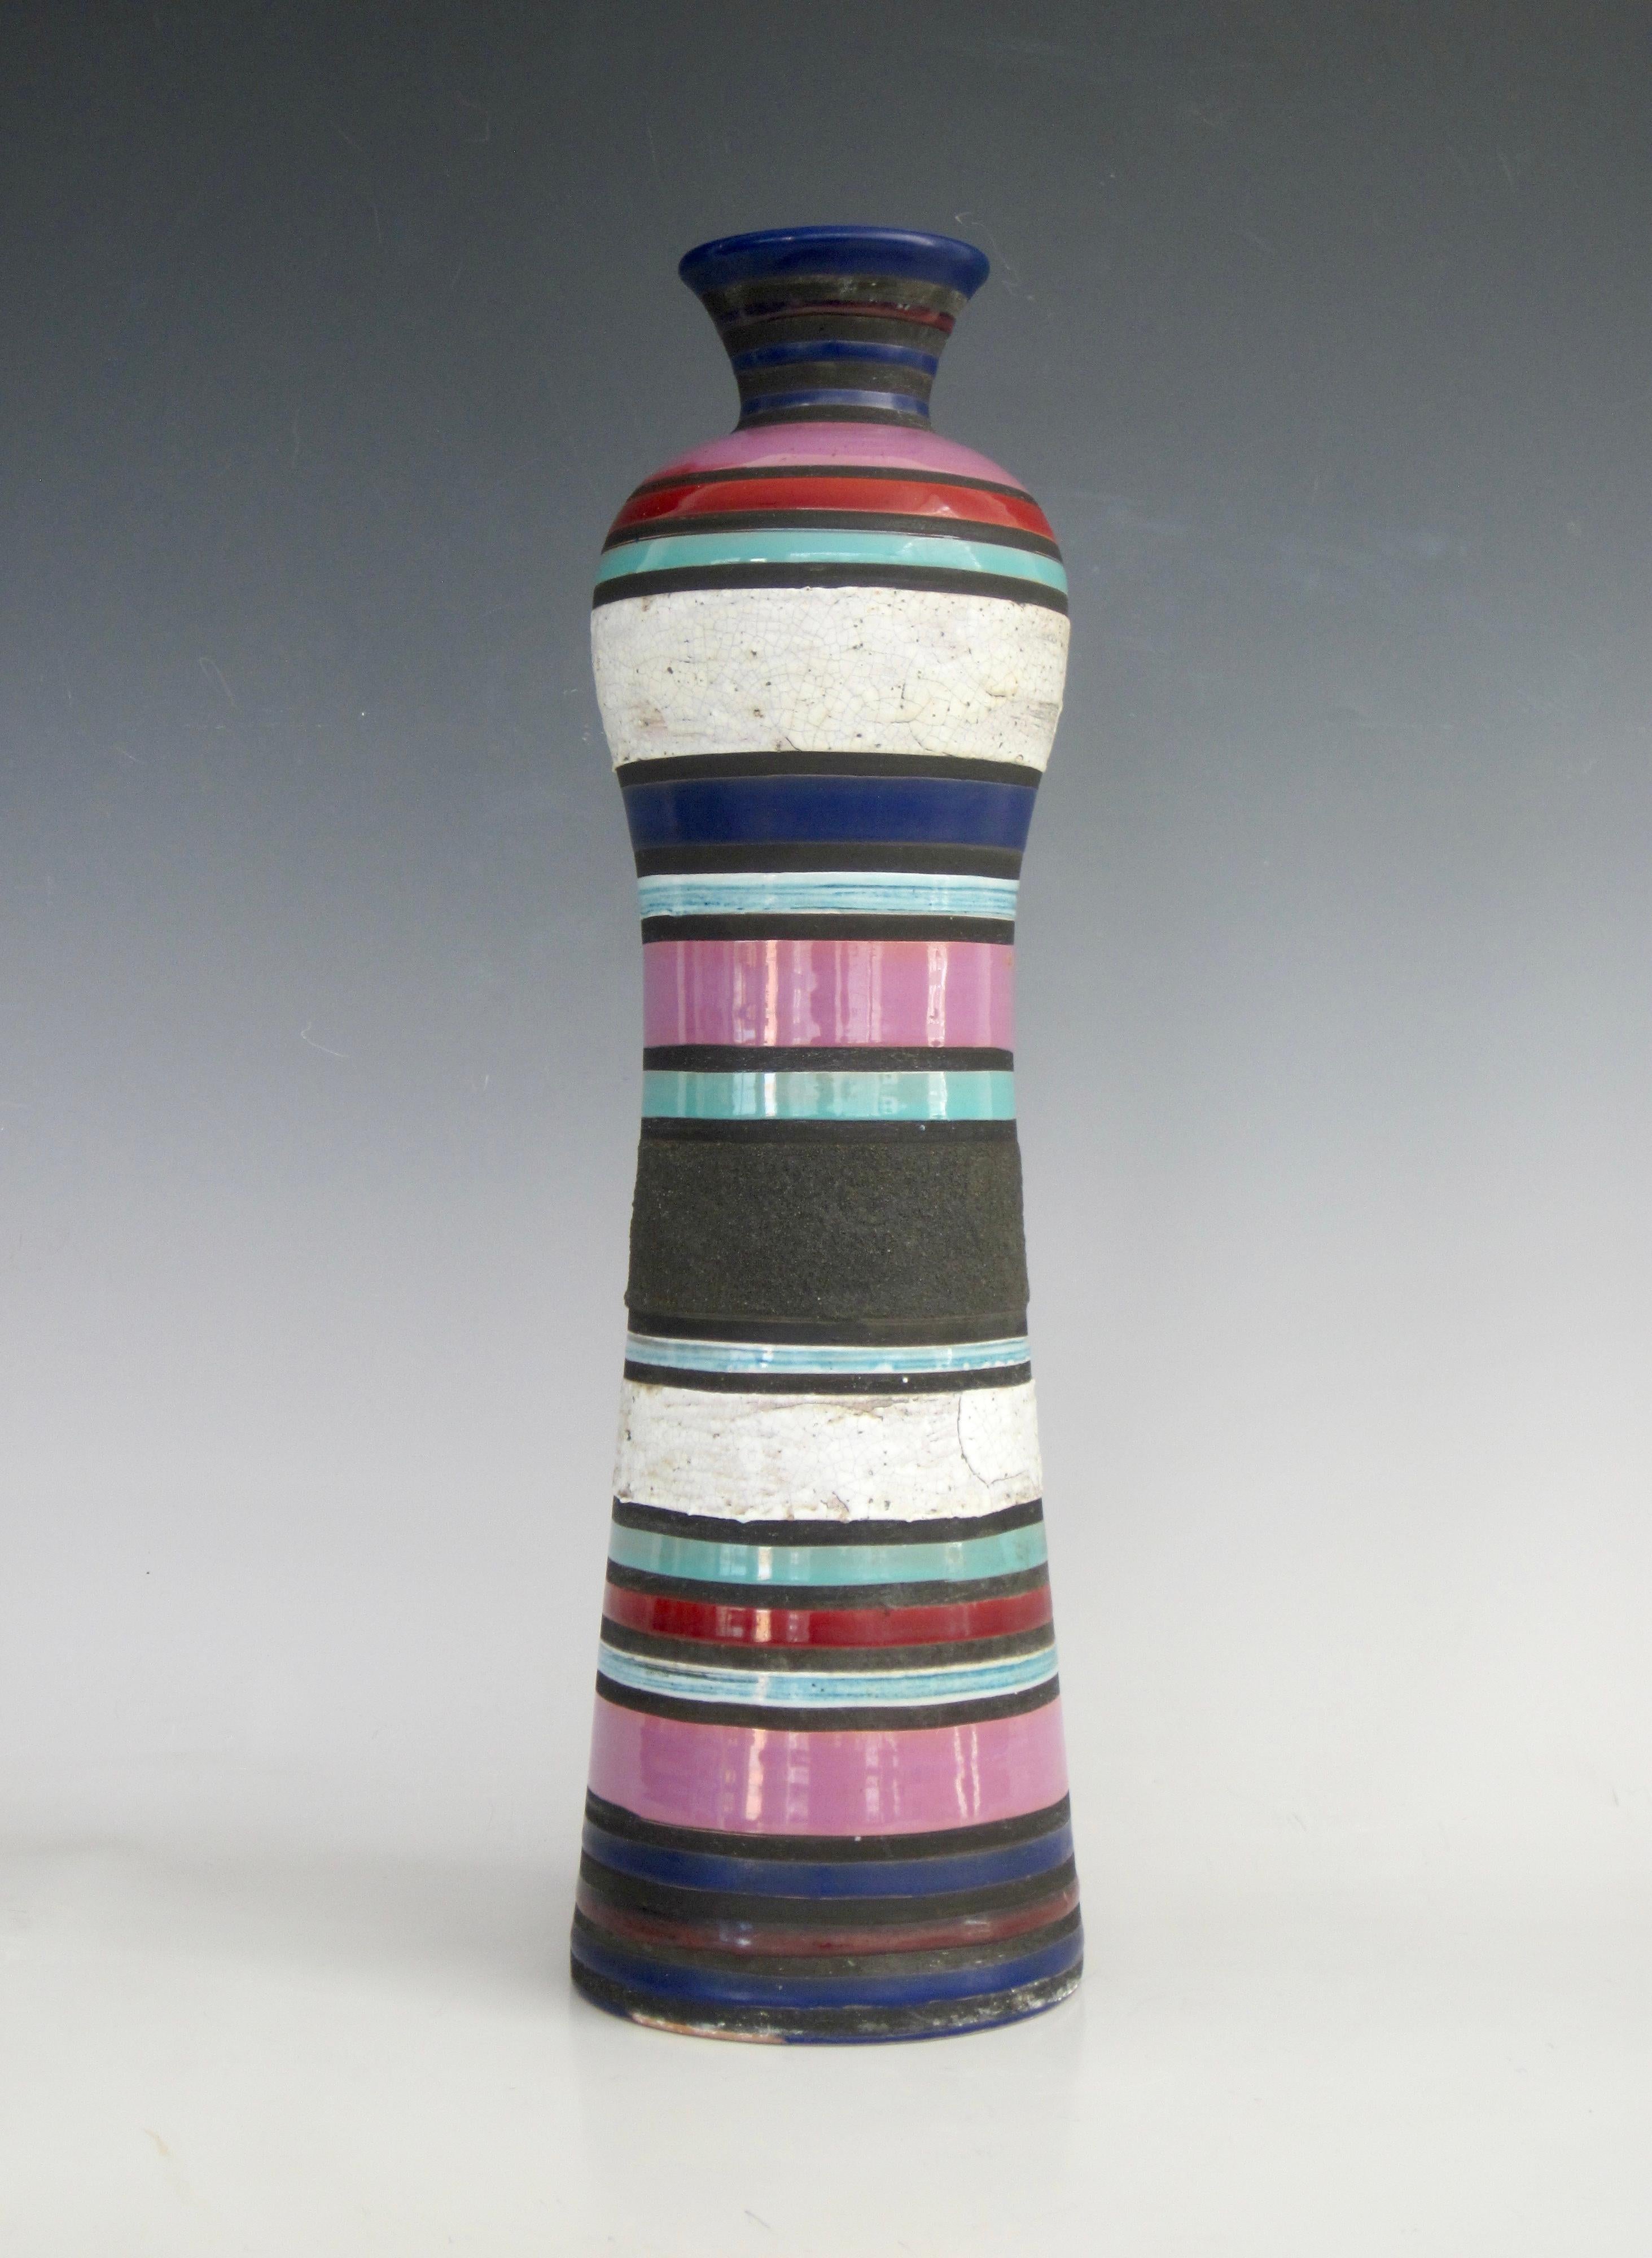 Aldo Londi for Bitossi Cambogia Series cylindrical vase with alternating horizontal stripes of various glazes and textures from the 1950s. The last photo shows it paired with a lidded jarl from the same Cambogia Series that is available in my